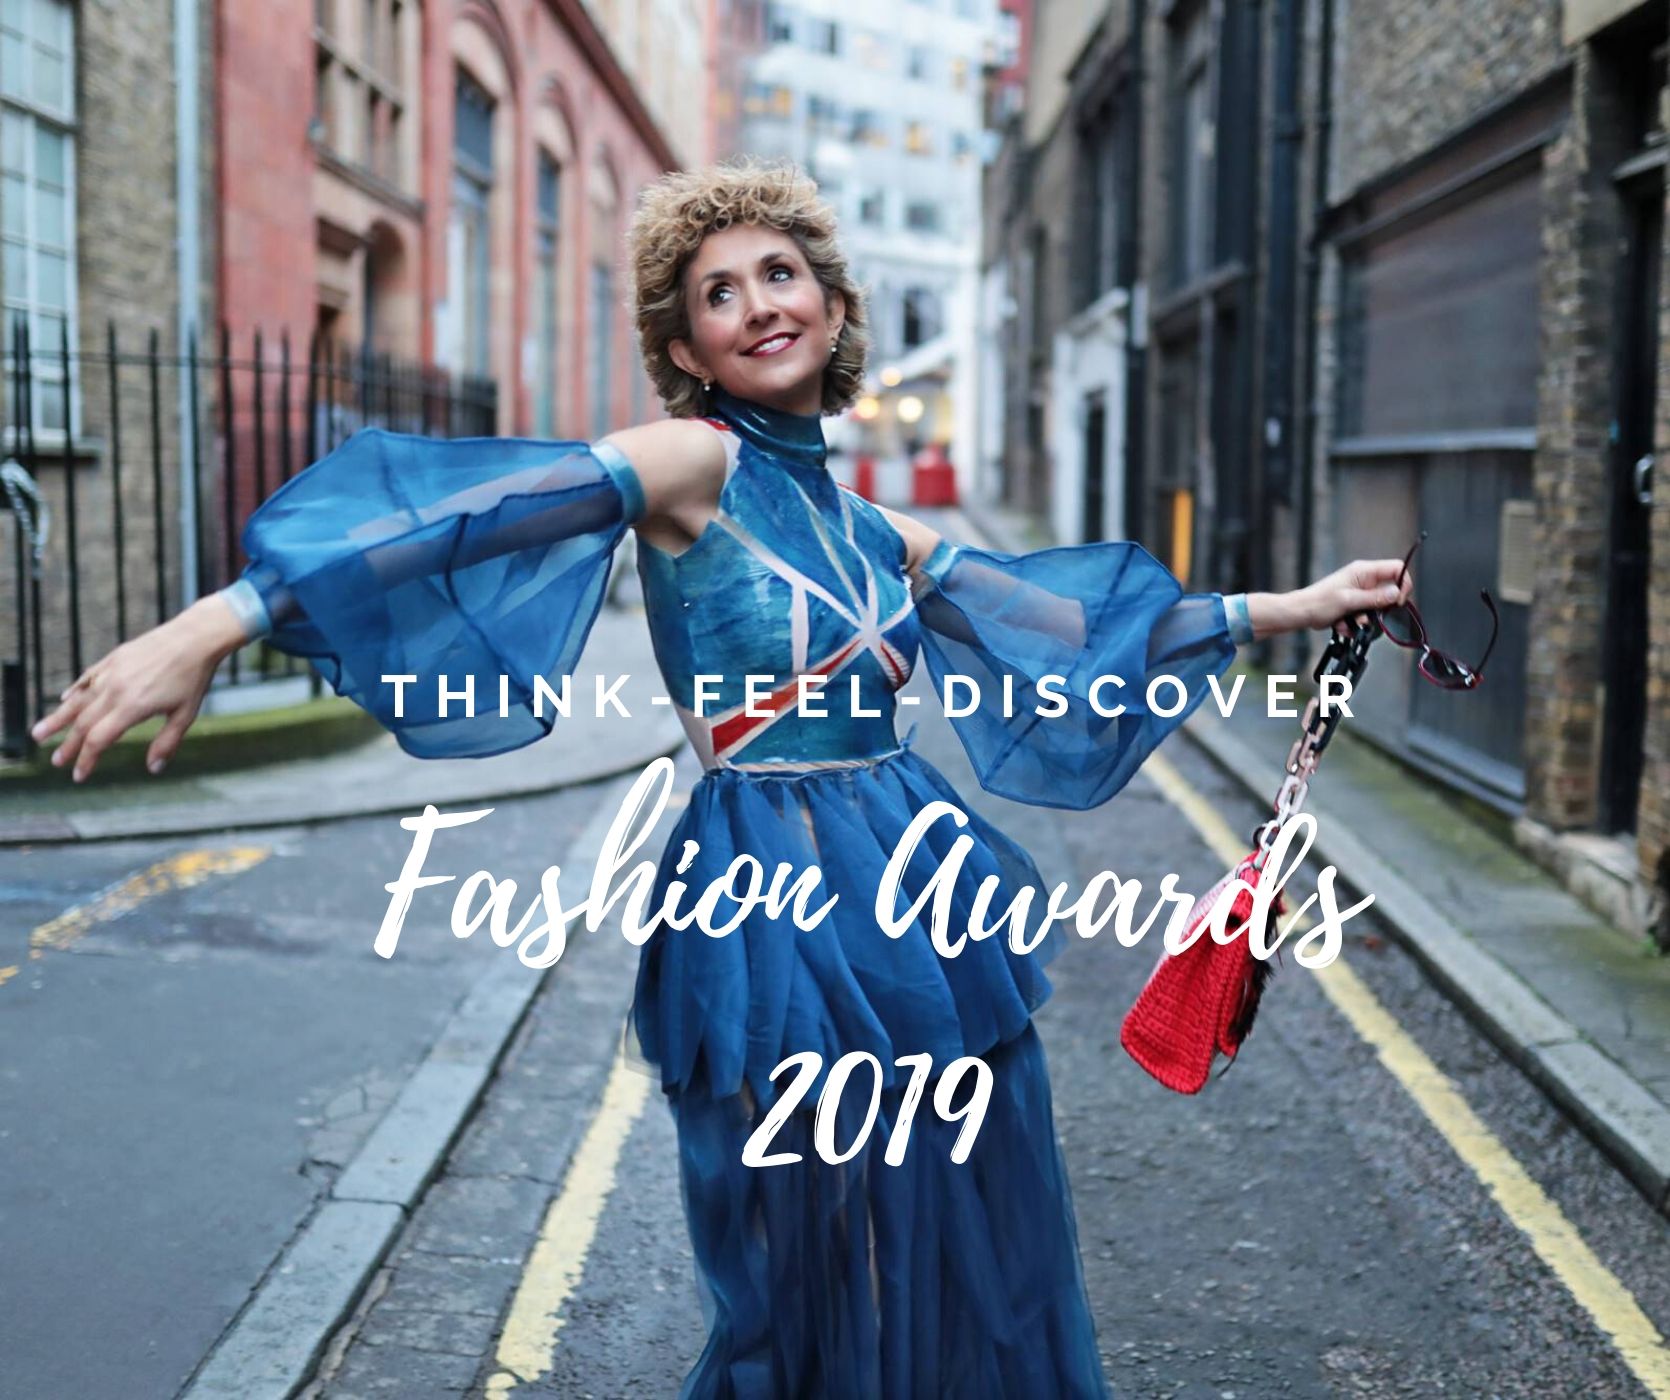 Fashion Awards 2019, Think Feel Discover London street style with graduates of Alexander College